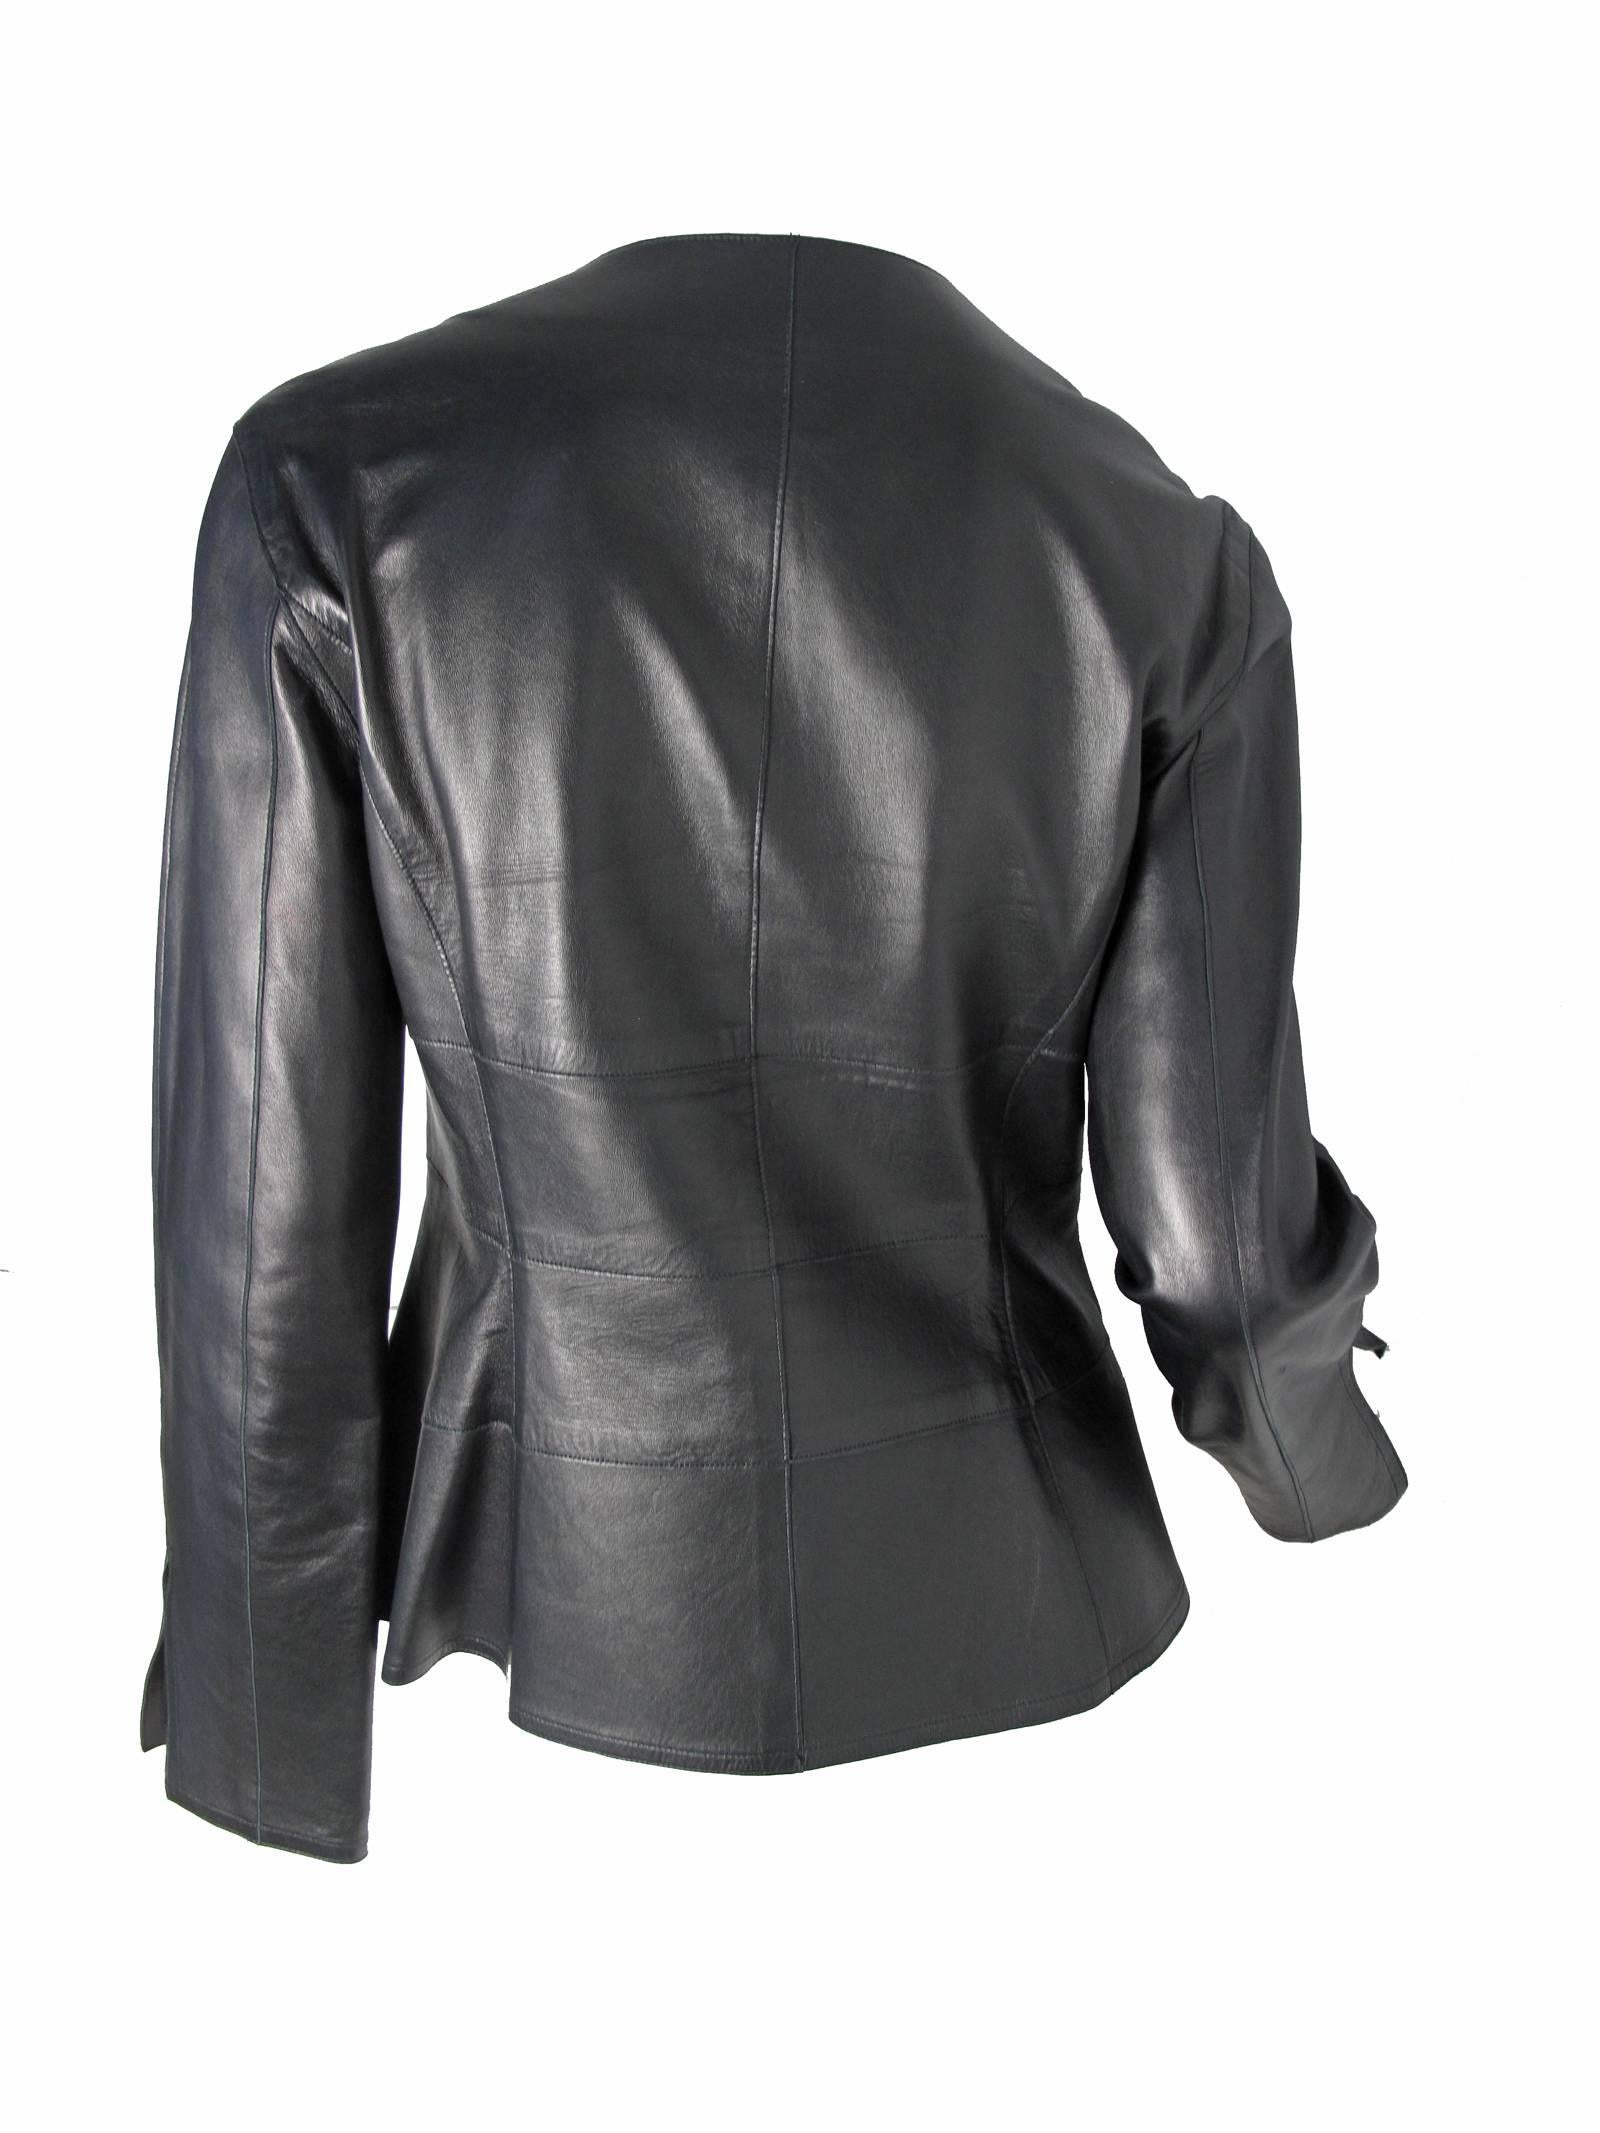 1999 Chanel black soft leather ( lambskin ) jacket with two front pockets. 